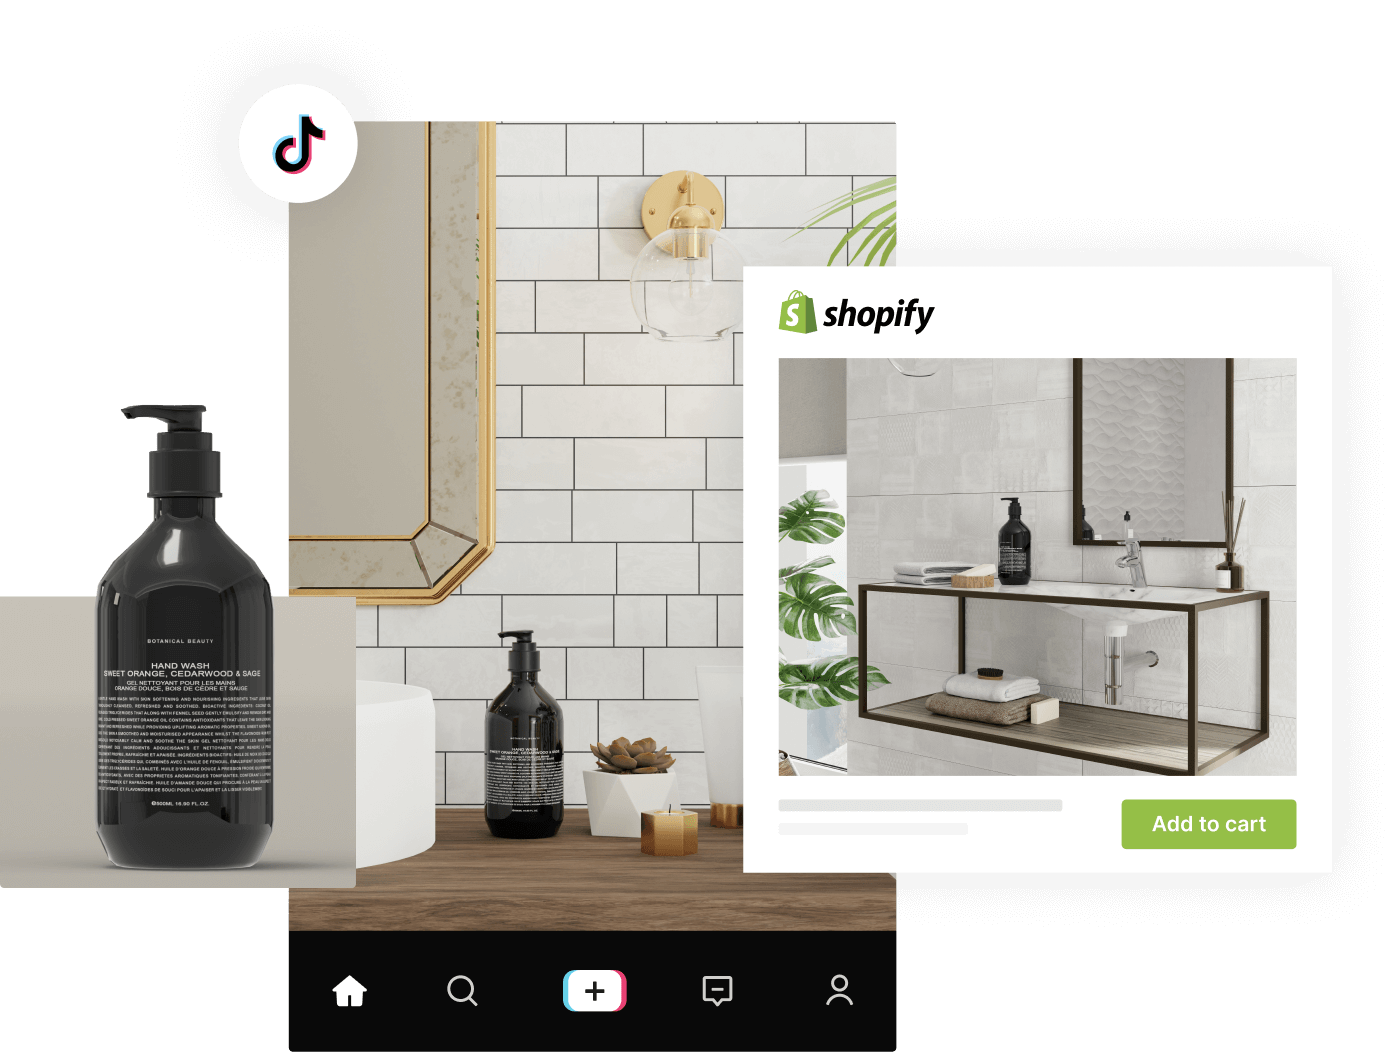 hand soap in imagine.io 3D bathroom templates on tiktok and shopify